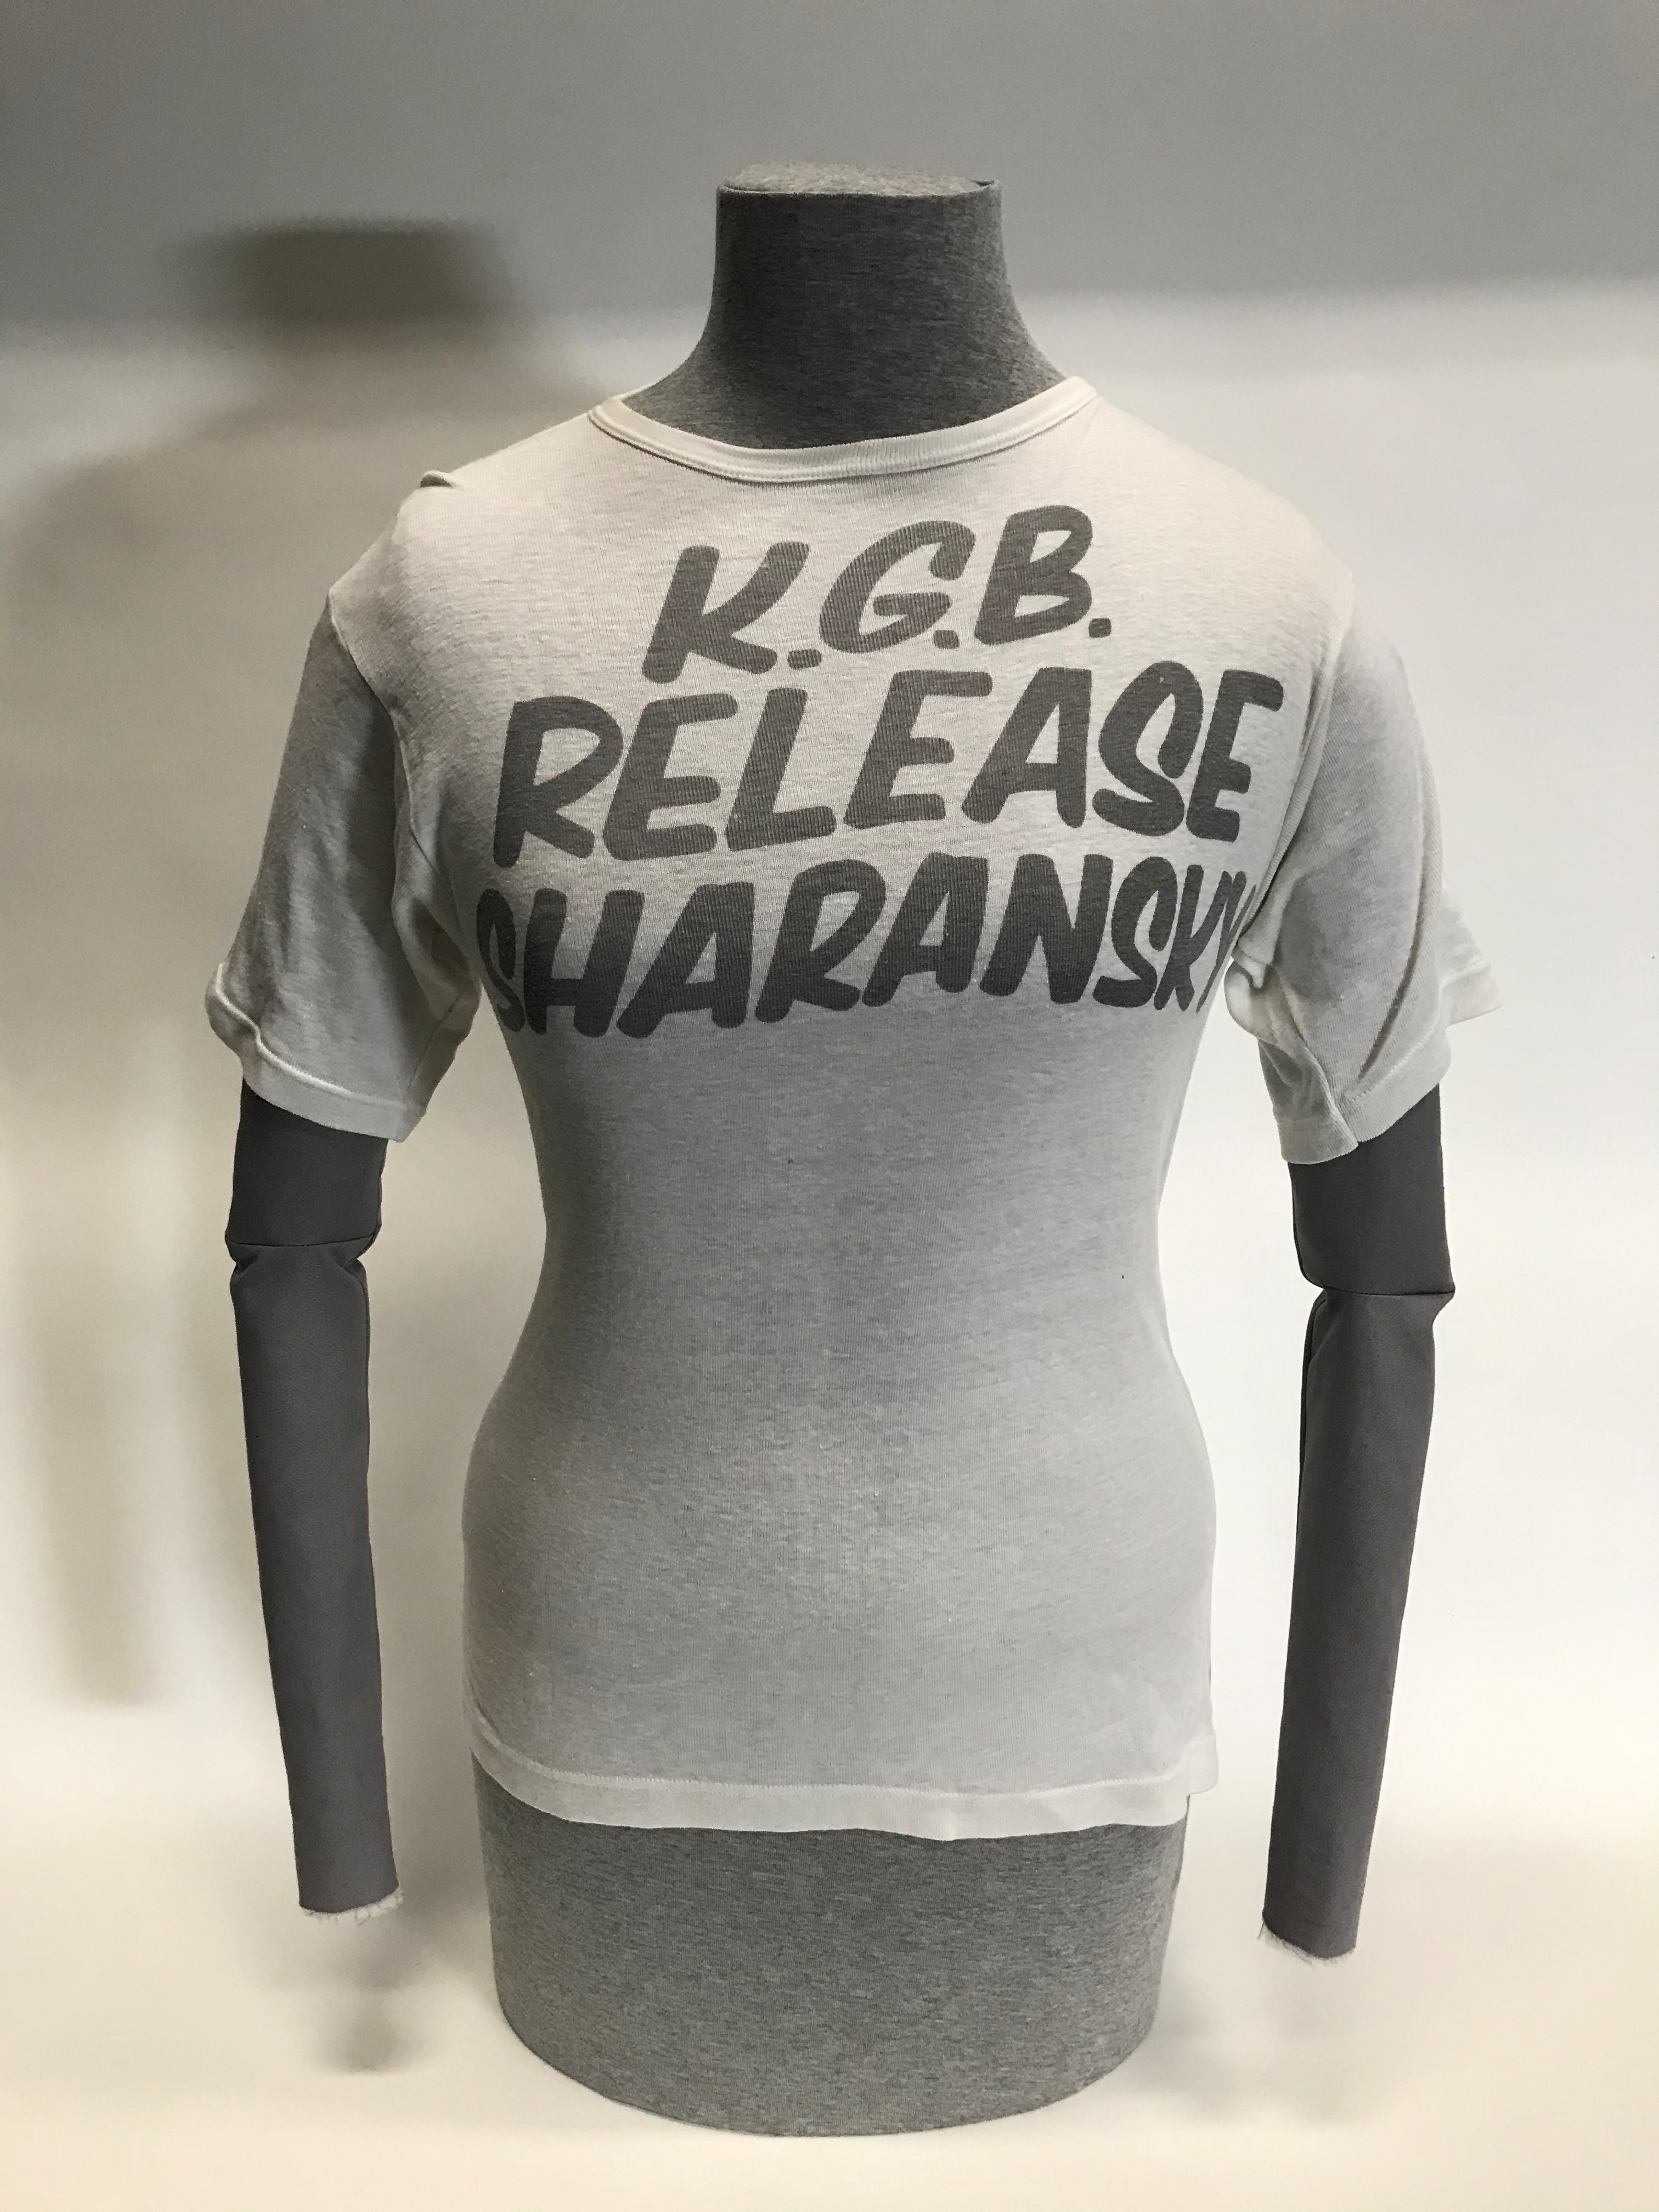 White protest t-shirt of the Women's Campaign for Soviet Jewry